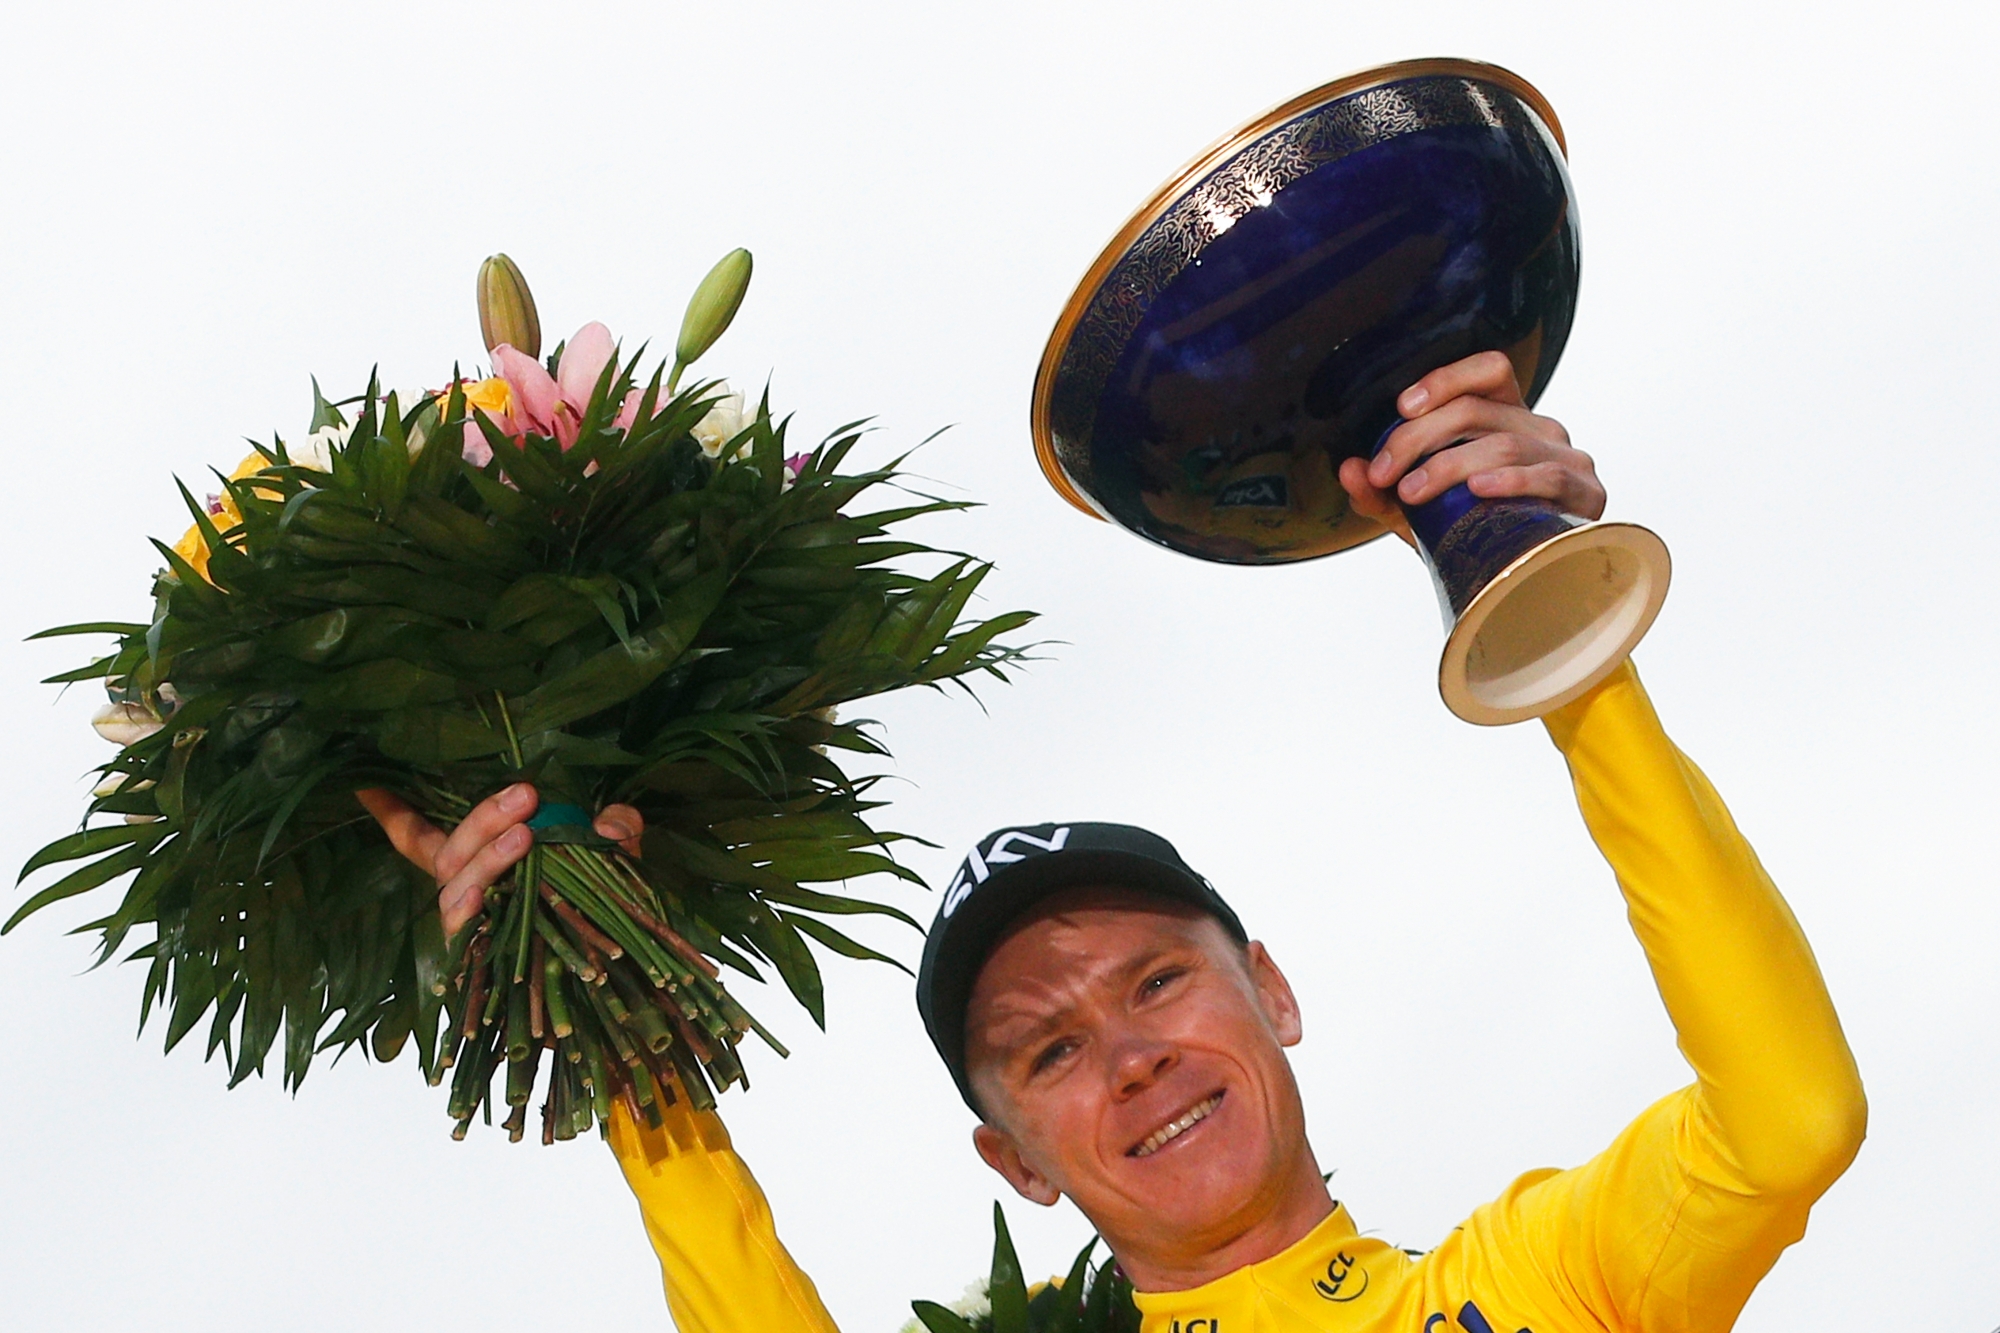 FILE - In this Sunday, July 23, 2017 file photo, Tour de France winner Britain's Chris Froome, wearing the overall leader's yellow jersey, holds the trophy on the podium after the twenty-first and last stage of the Tour de France cycling race over 103 kilometers (64 miles) with start in Montgeron and finish in Paris, France. After winning the Tour de France for a fourth time, Chris Froome now will try to break his run of second-place finishes at the Spanish Vuelta which starts Saturday Aug. 19, 2017. (AP Photo/Christophe Ena, File) Spanish Vuelta Preview